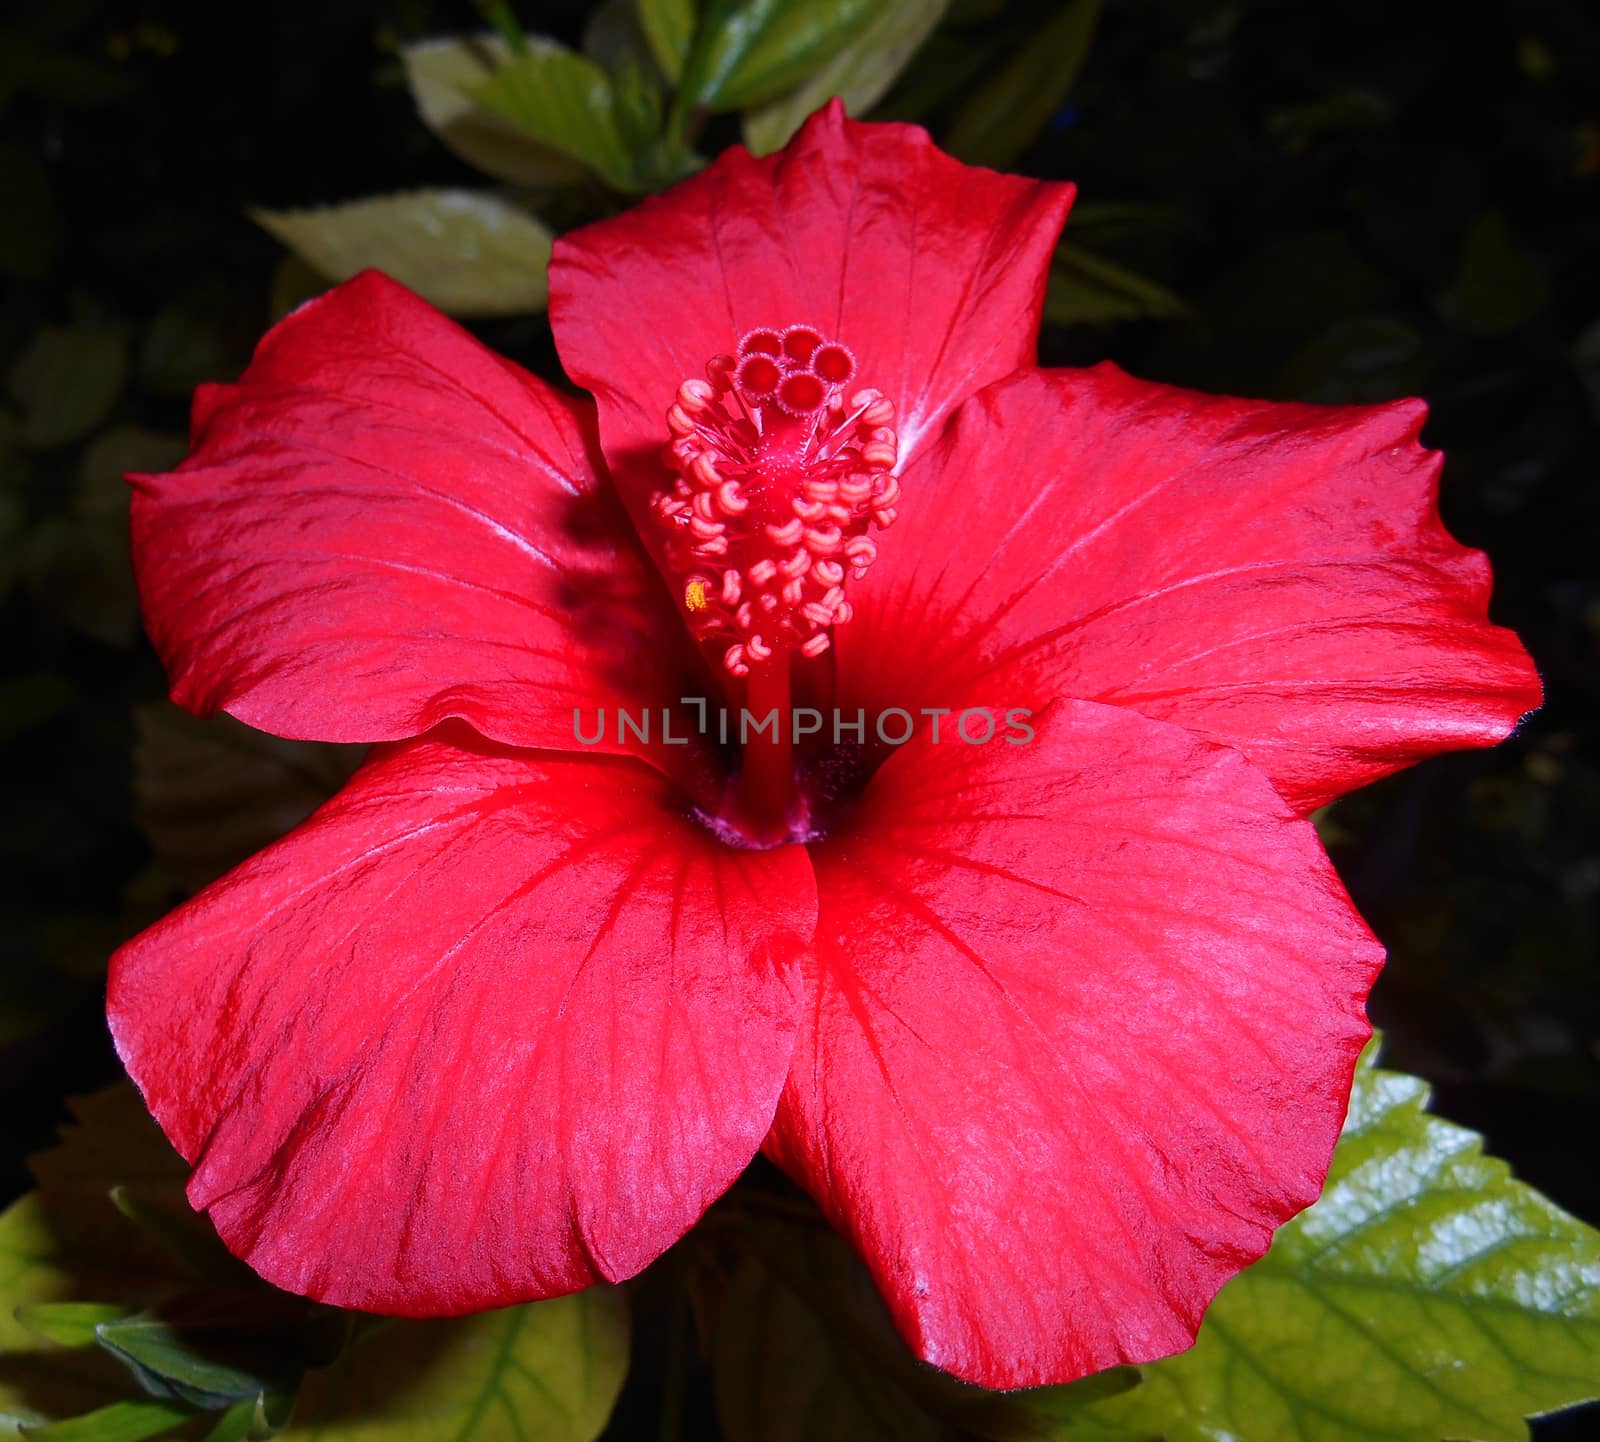 Red hibiscus on blurred background.

Picture taken on November 29, 2014.